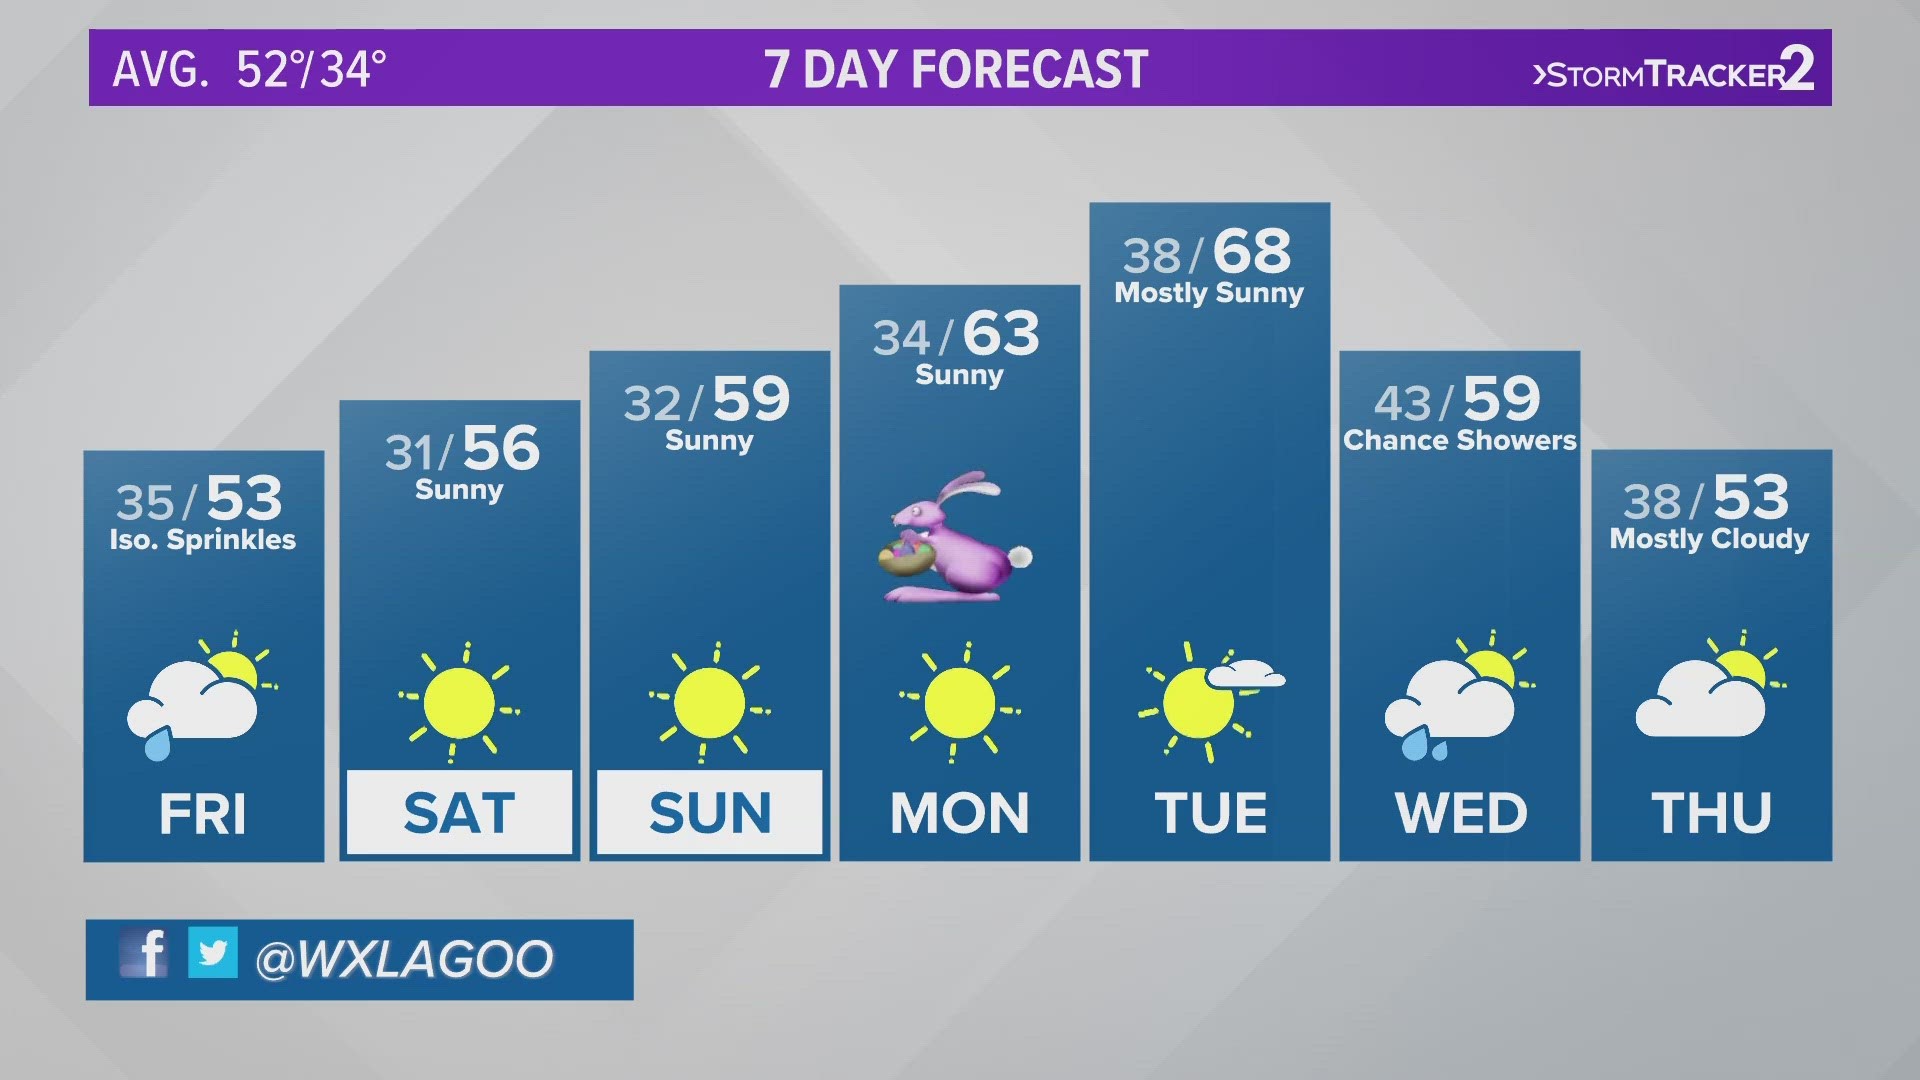 Temperatures will climb to near 60 degrees this weekend and keep climbing next week.